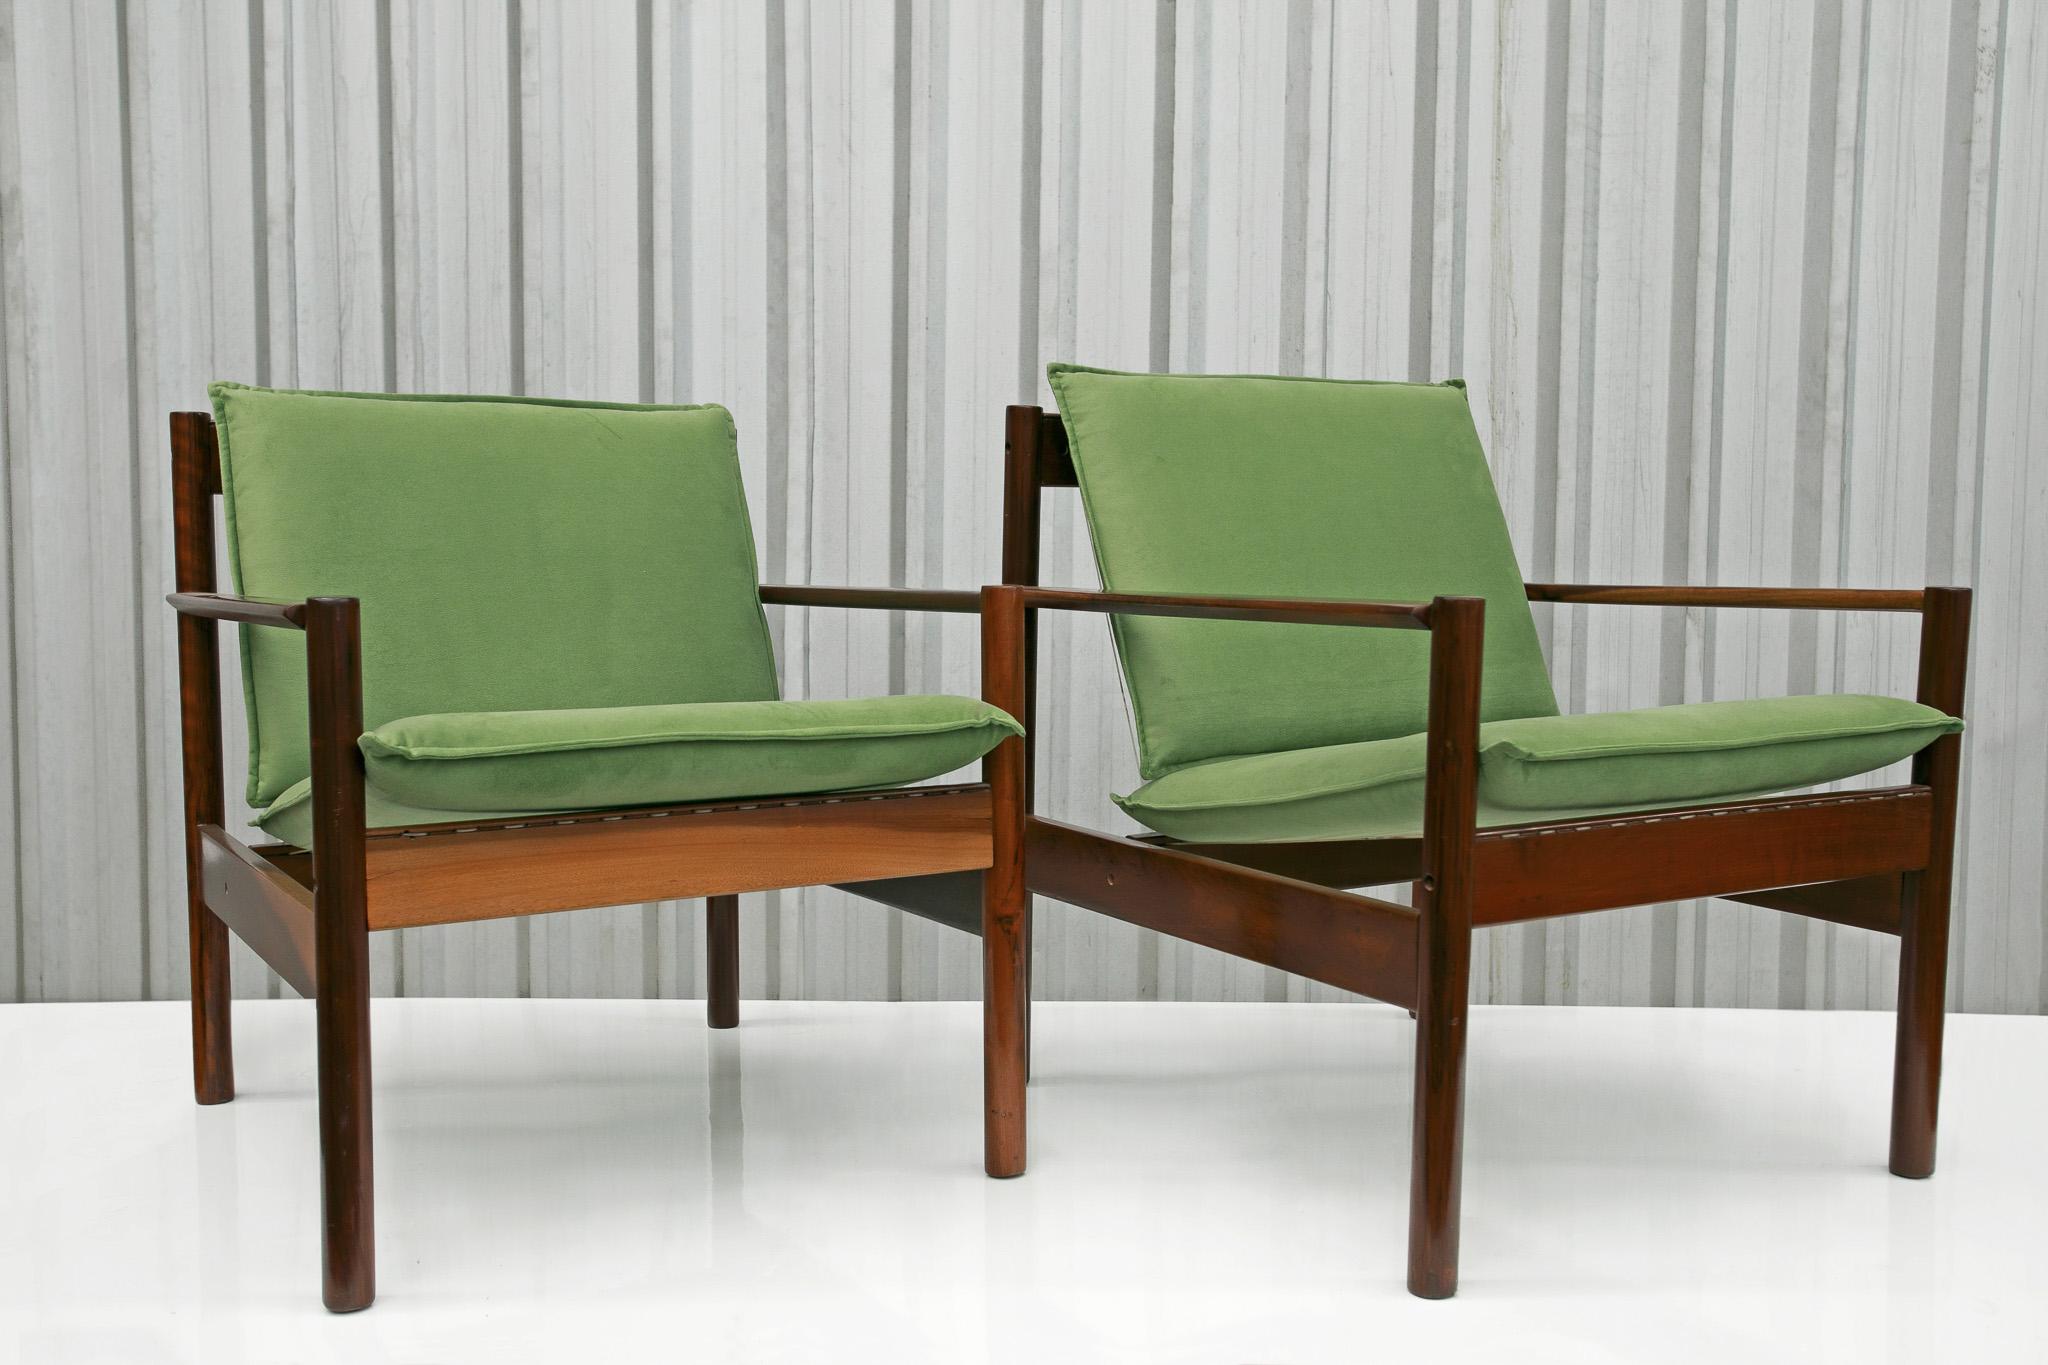 Woodwork Brazilian Modern Armchairs in Hardwood & Fabric, Michel Arnoult, 1960s For Sale